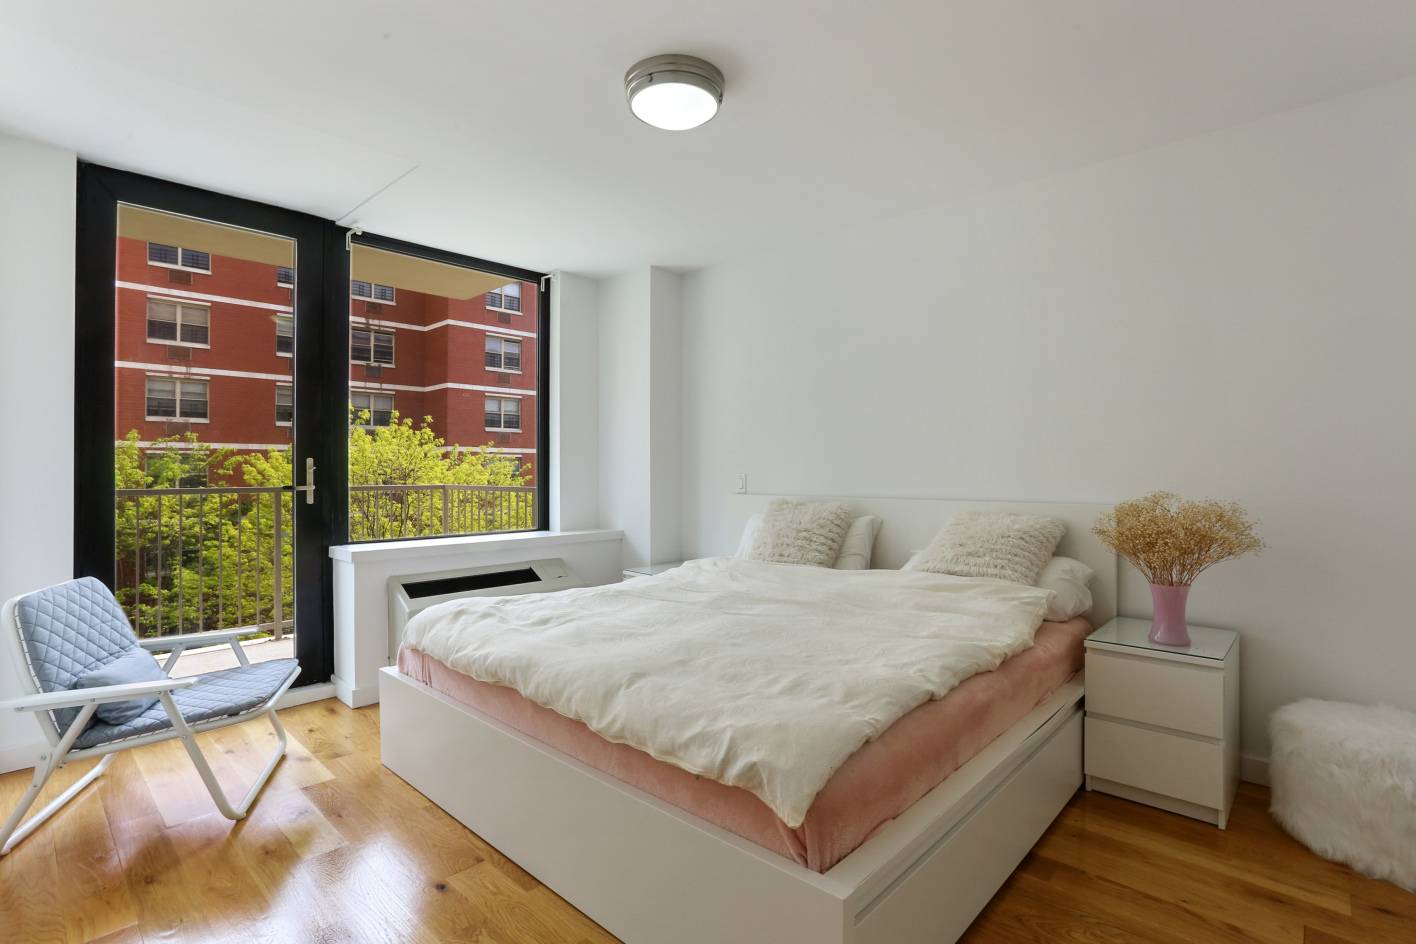 Welcome home to the perfect 1 bedroom condo in prime Central Harlem.